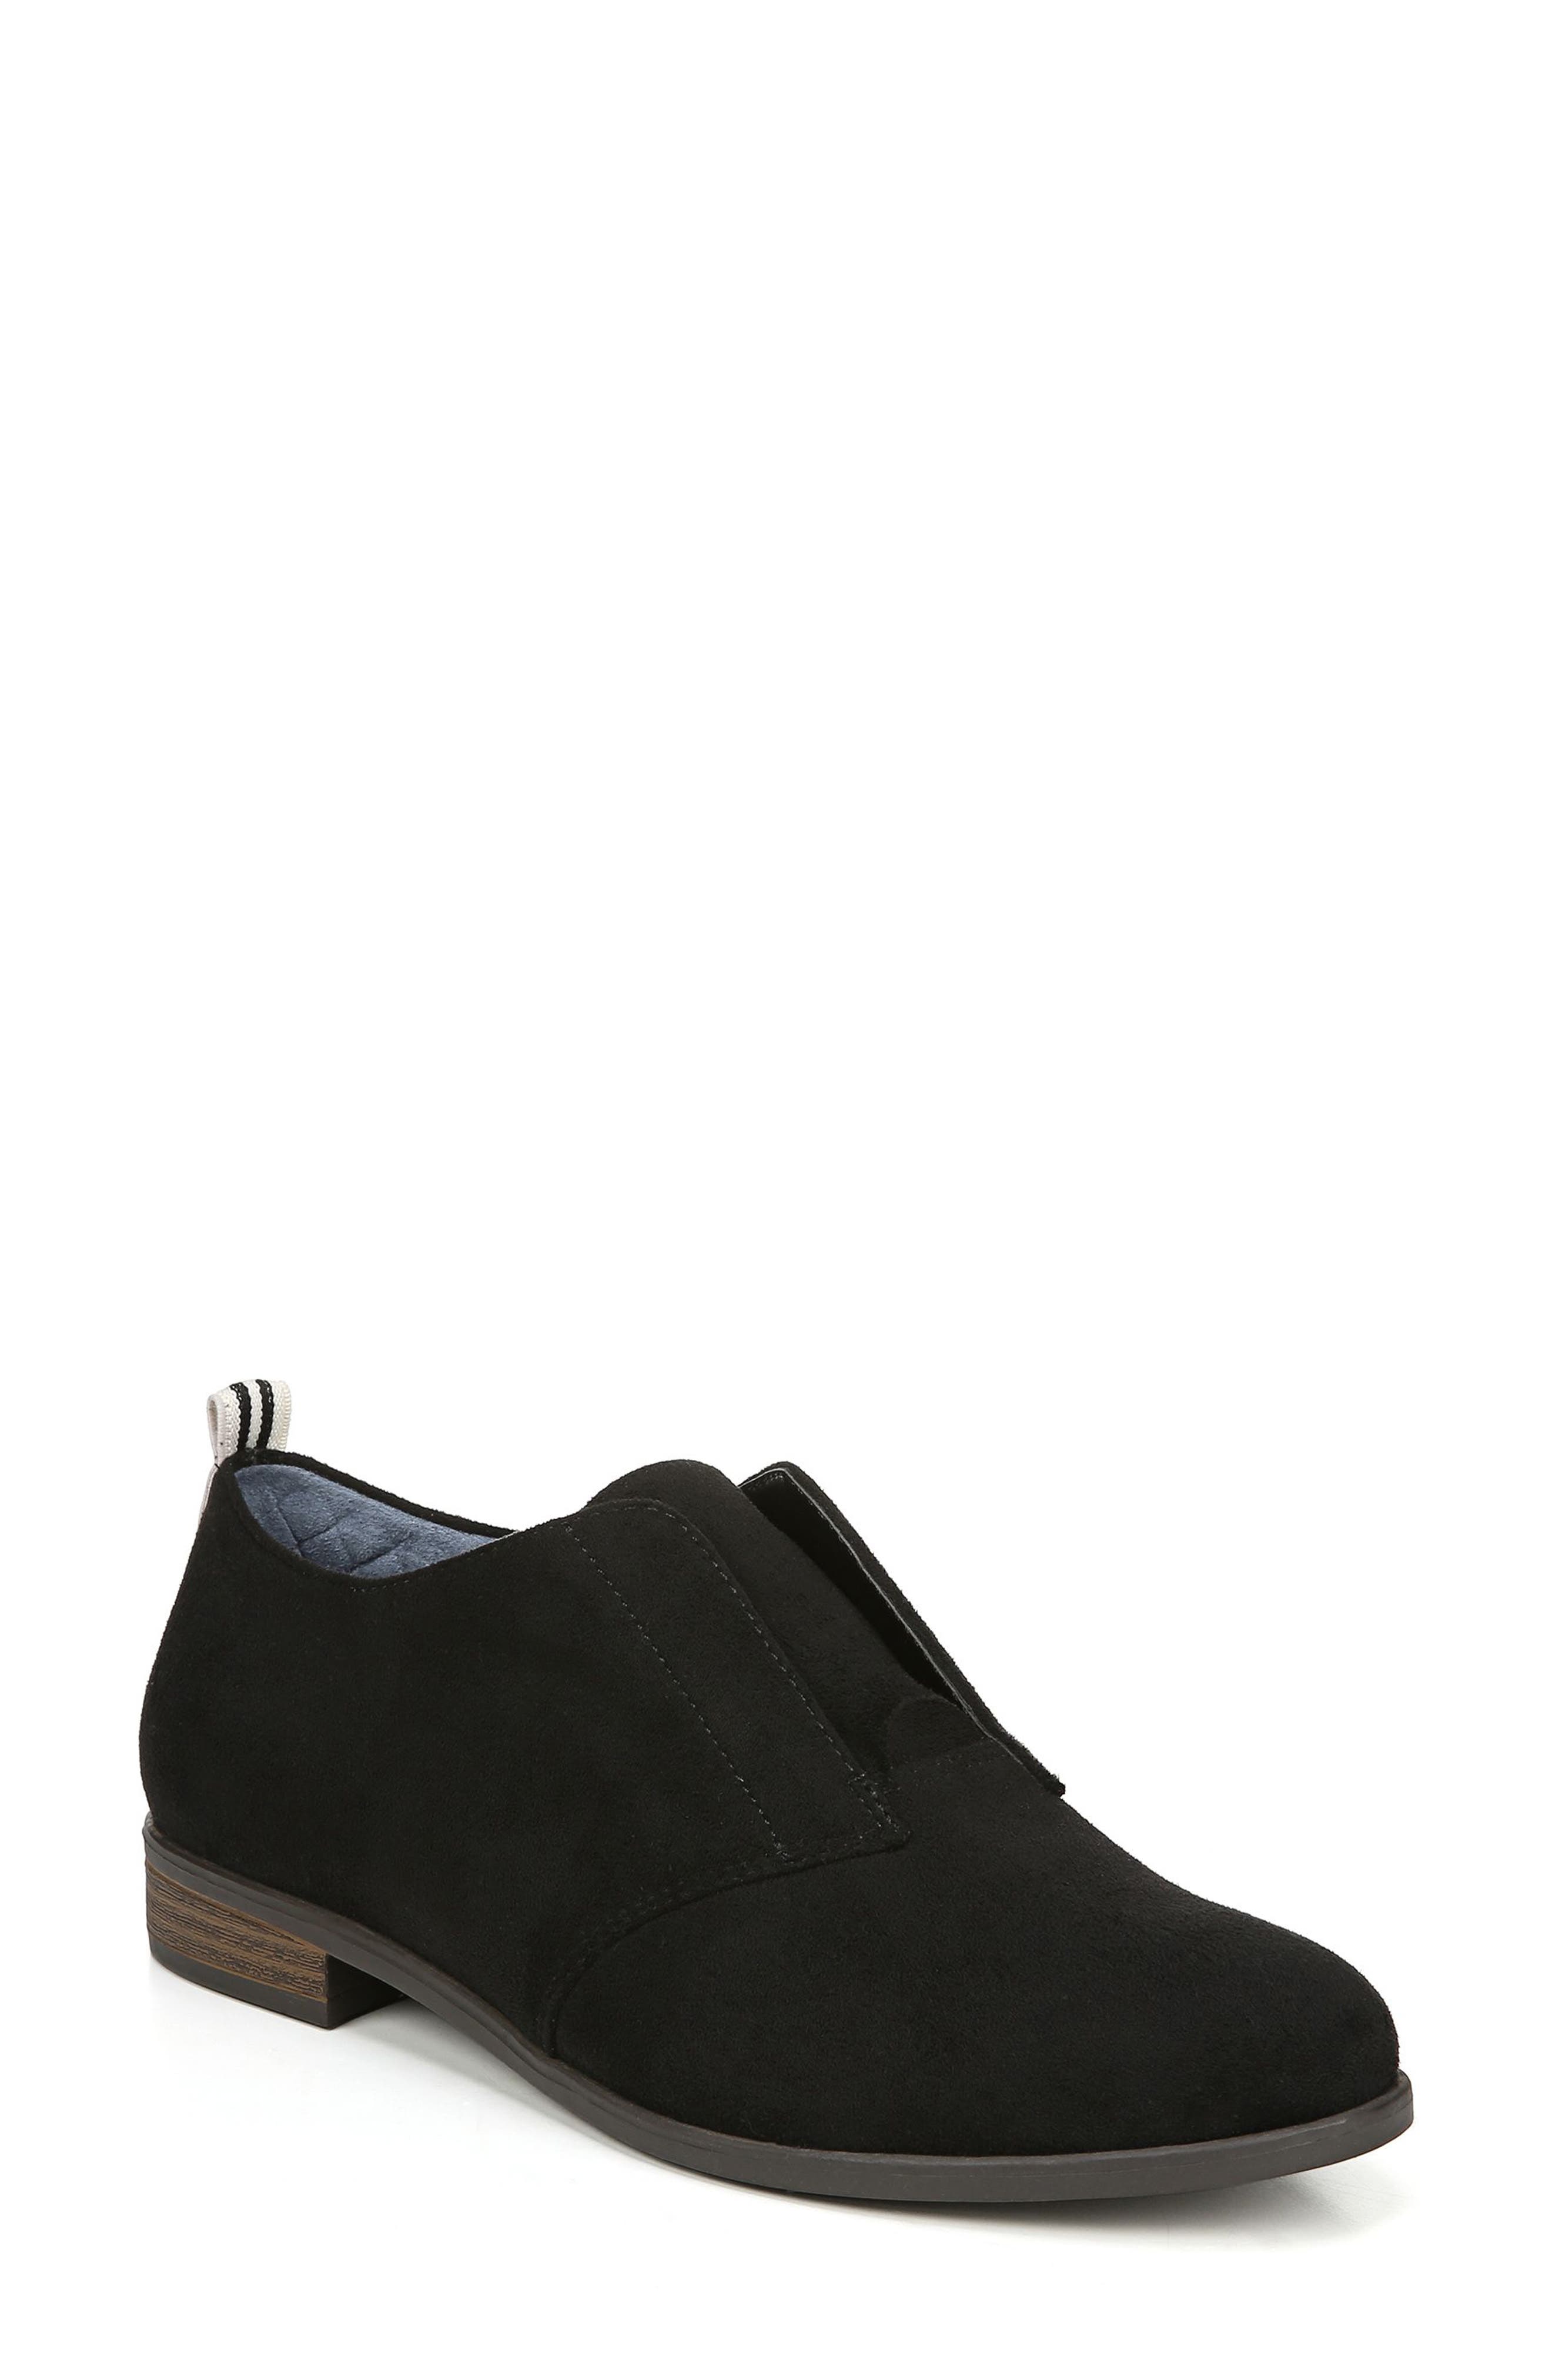 UPC 736705464174 product image for Women's Dr. Scholl's Rialta Slip-On Oxford, Size 9 M - Black | upcitemdb.com